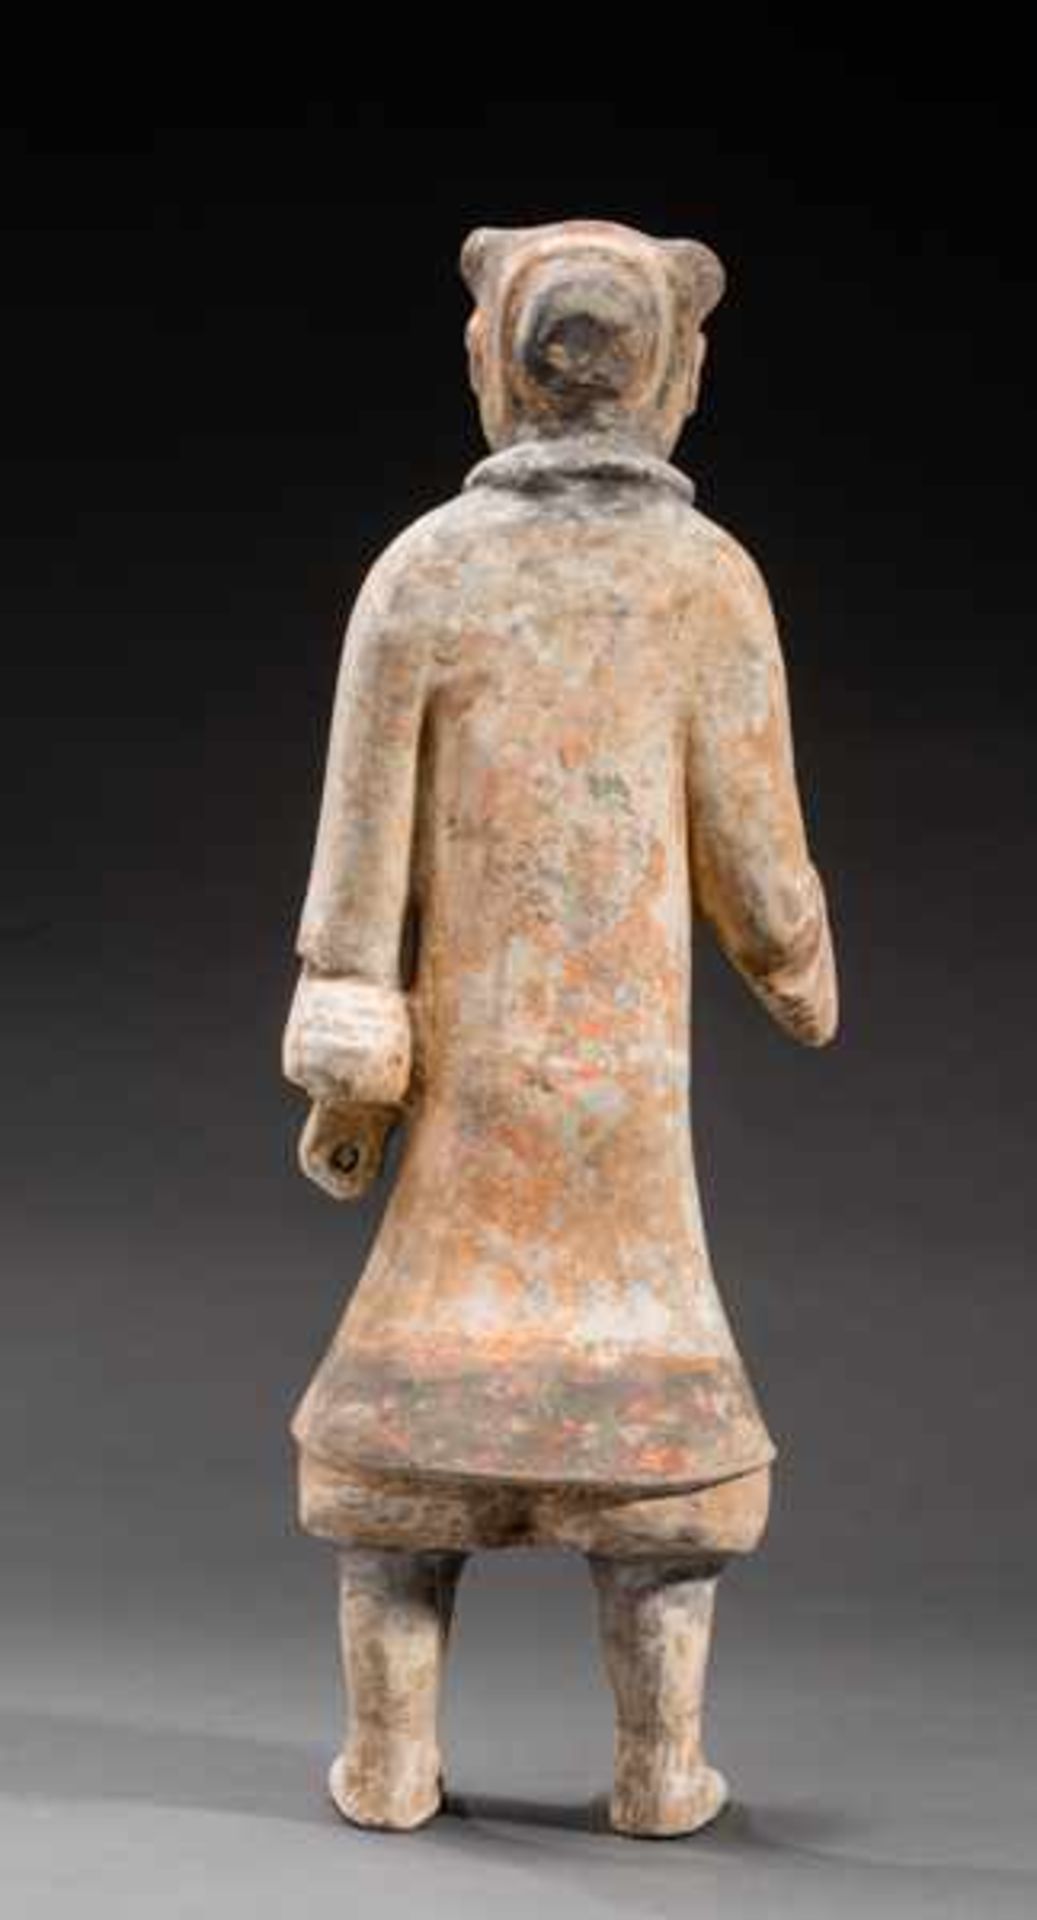 COURTLY FIGURINE Terracotta with remnants of original painting. China, Han dynasty, 2nd cent. BCE陶仆A - Image 4 of 7